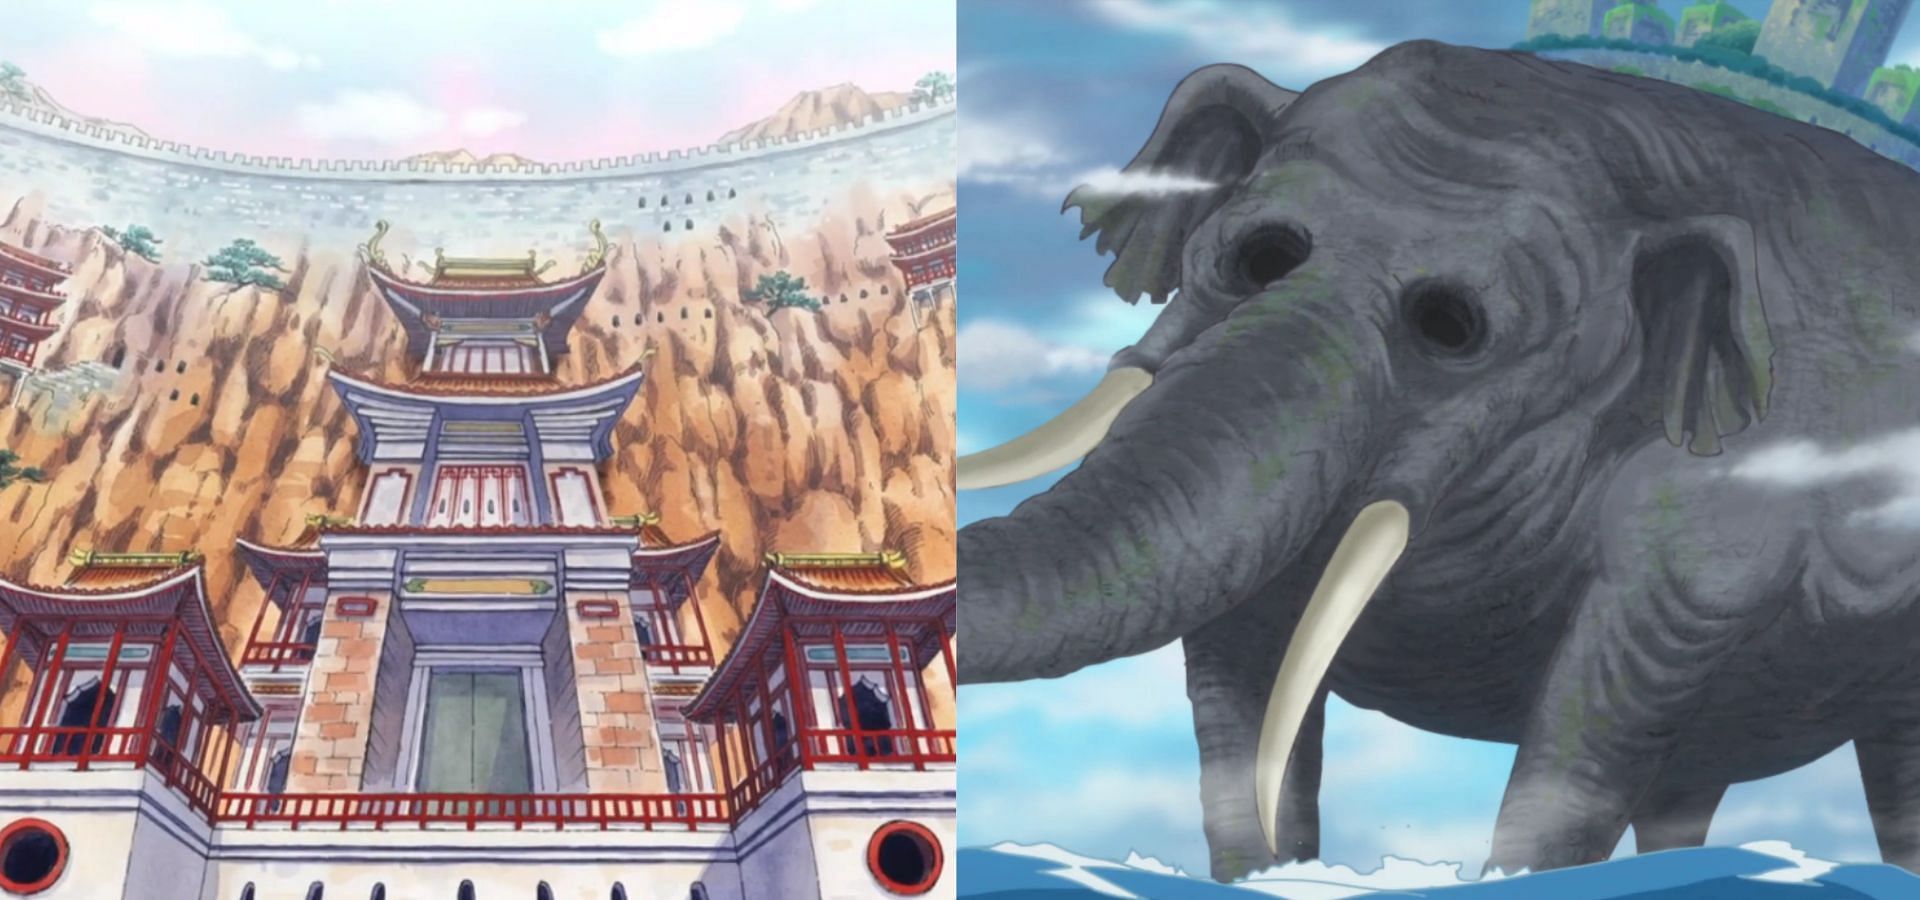 One Piece locations inspired by the real world (Image via Toei Animation)